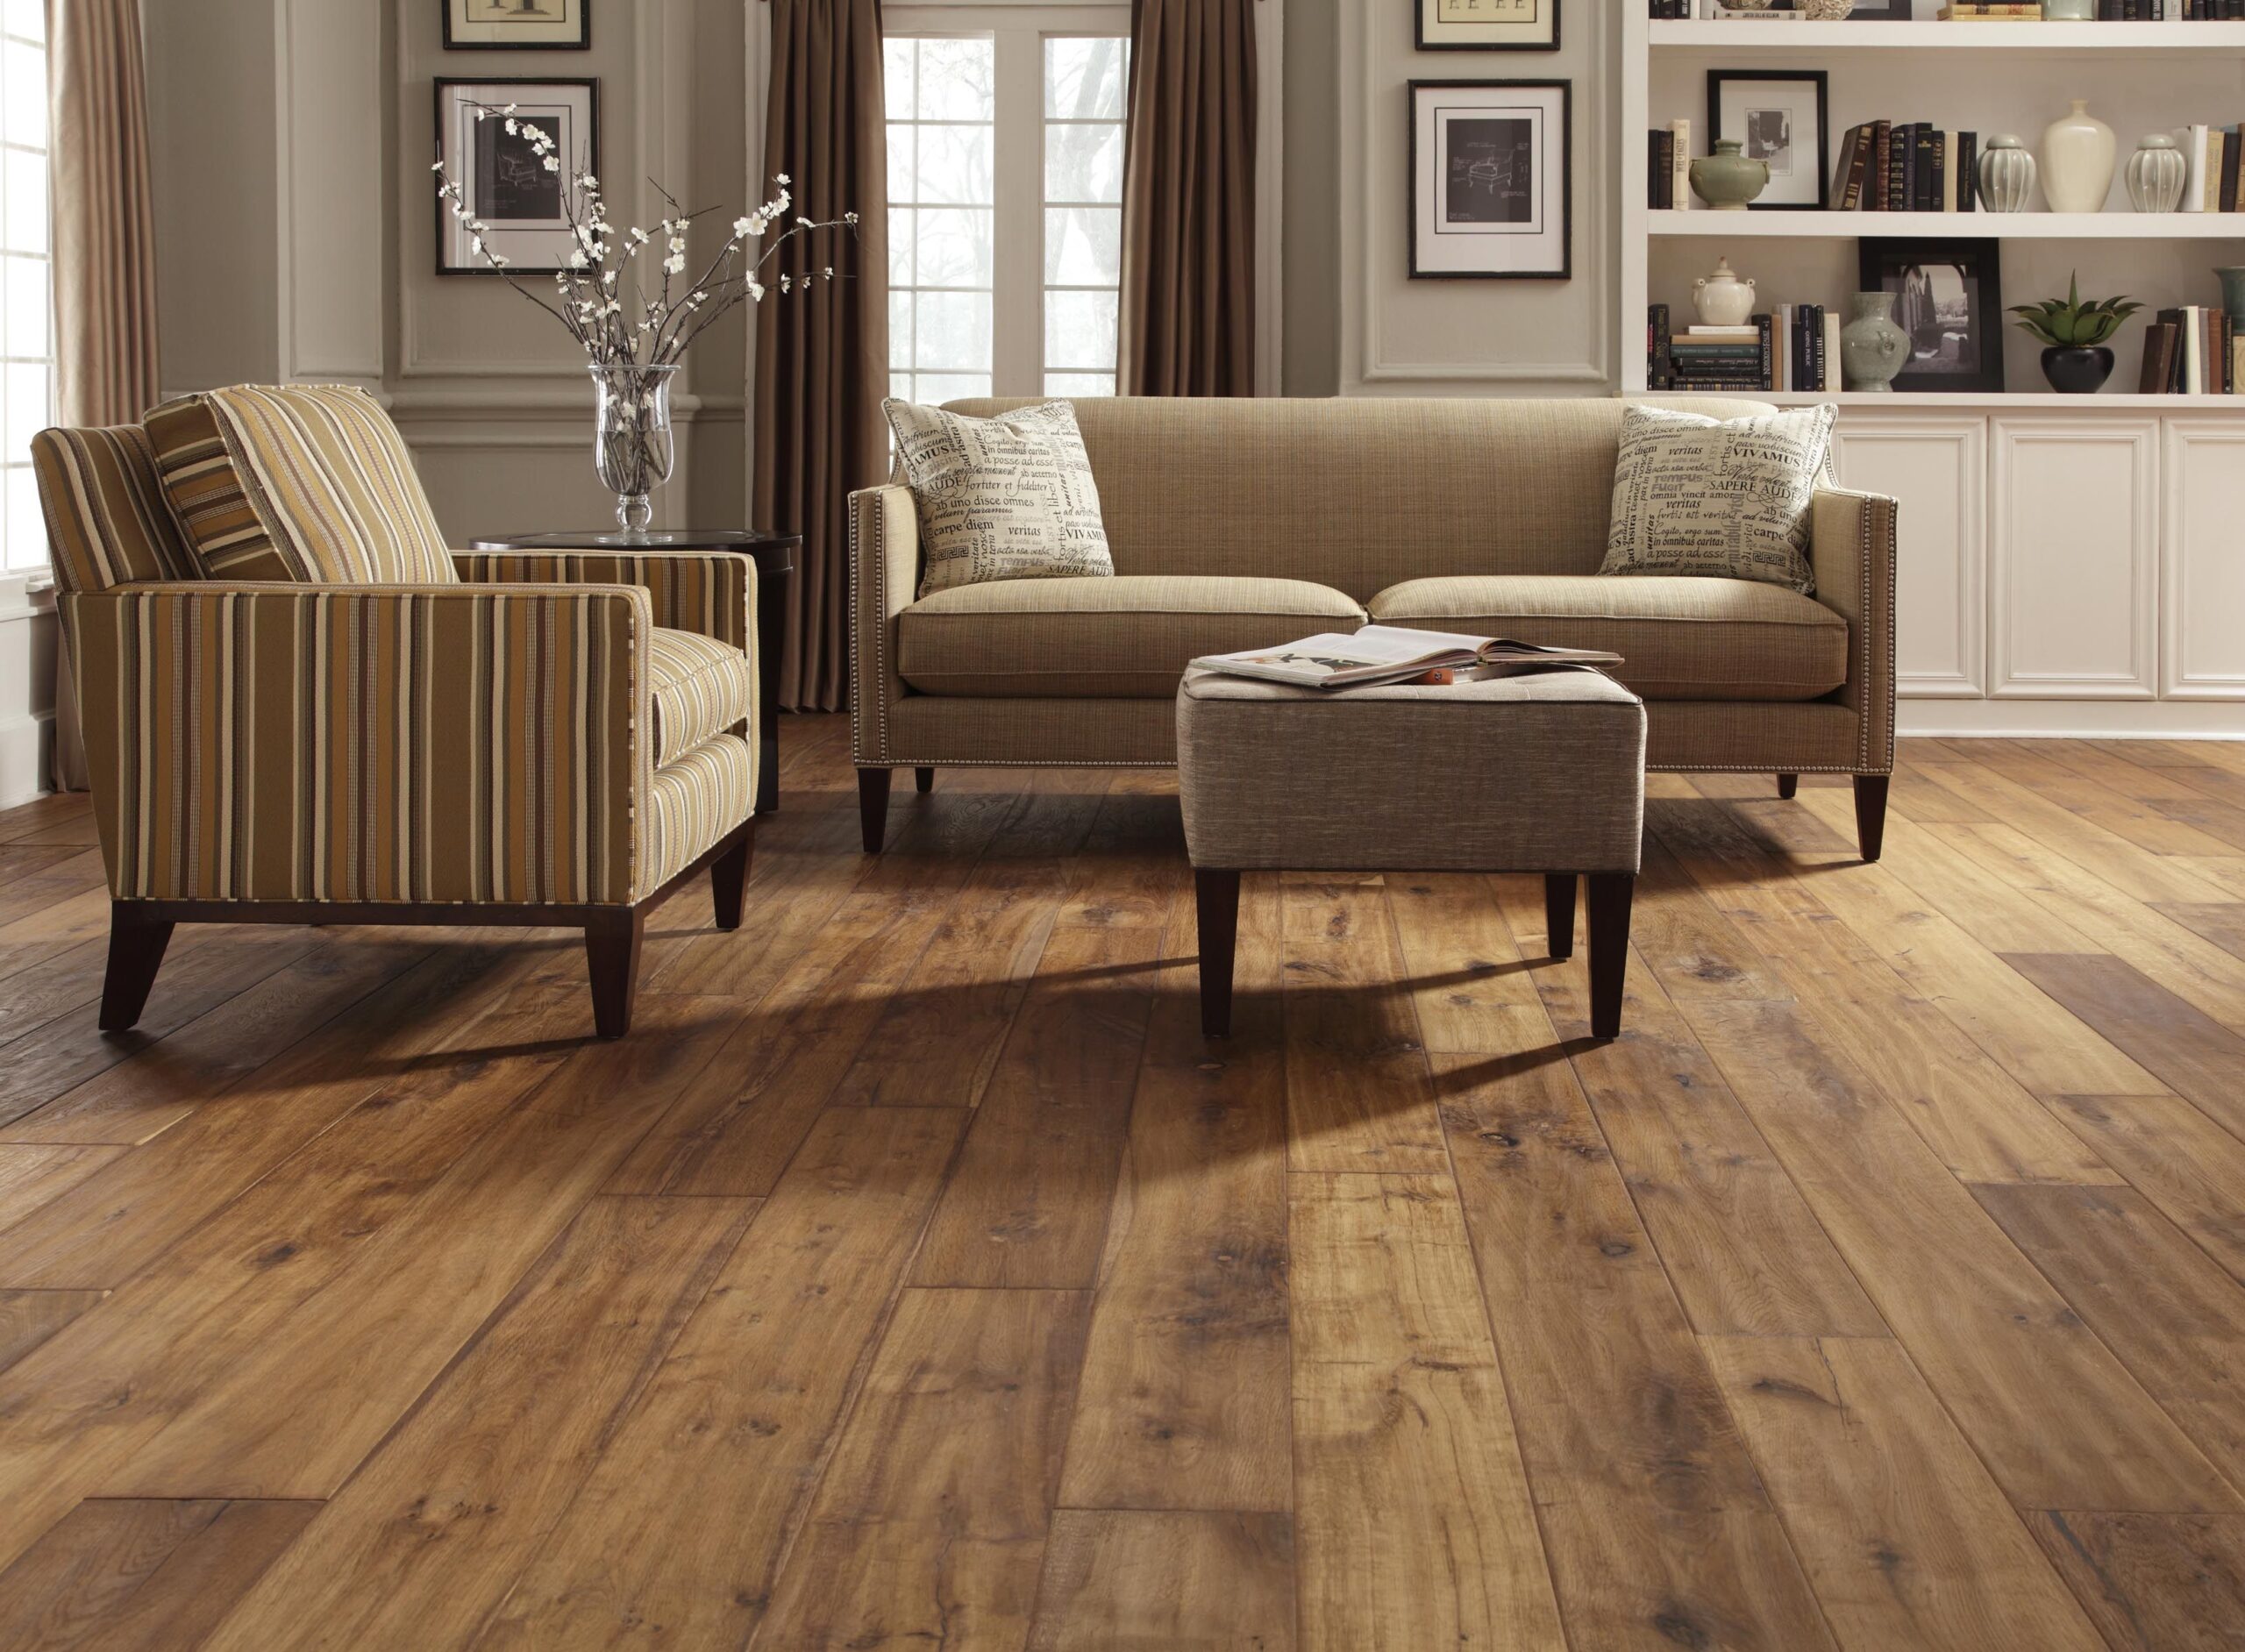 5 Best Laminate Flooring Colours For, Rooms With Laminate Flooring